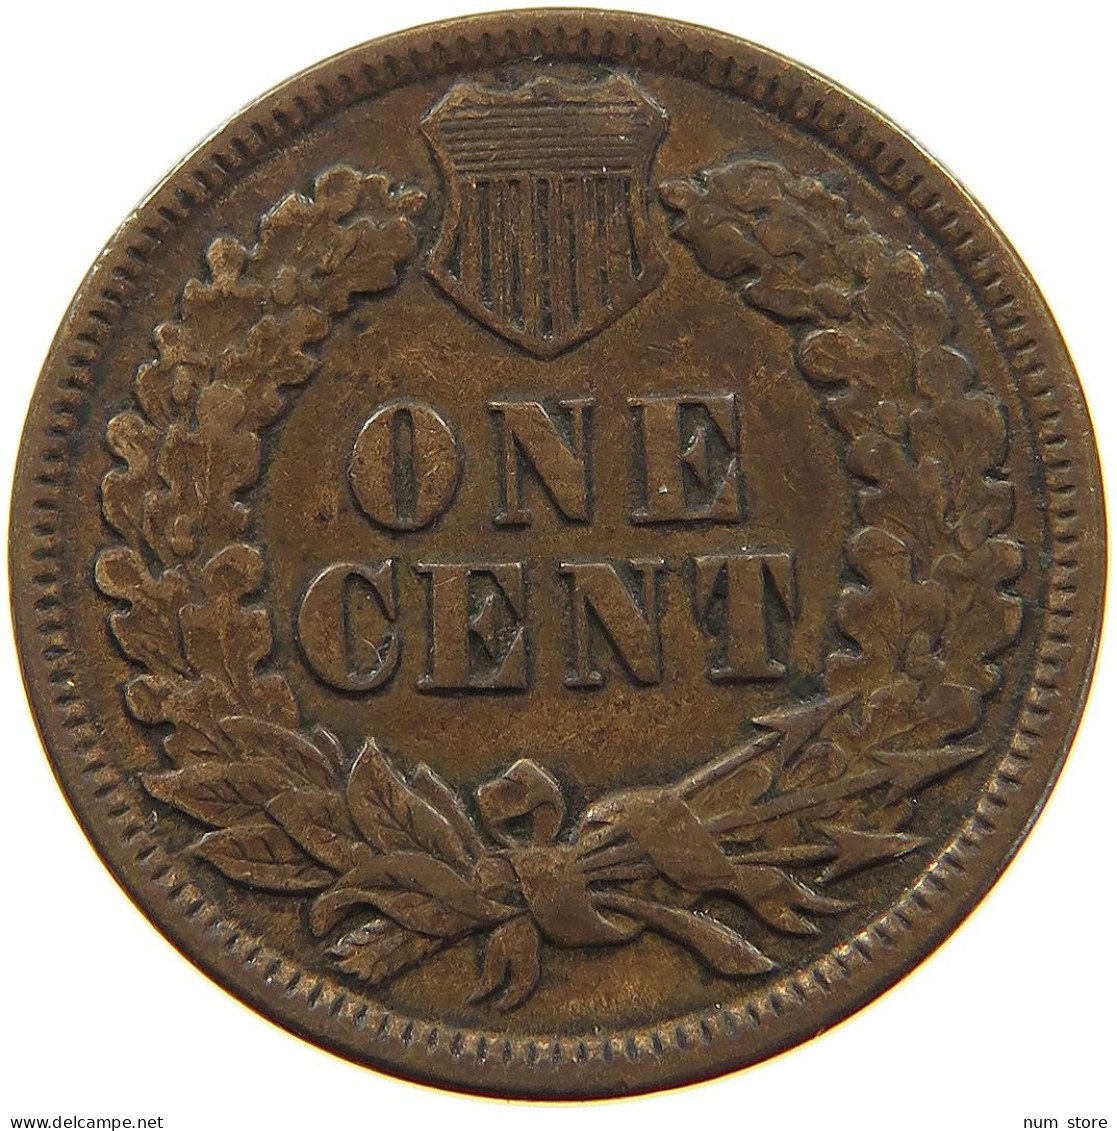 UNITED STATES OF AMERICA CENT 1889 INDIAN HEAD #a013 0345 - 1859-1909: Indian Head